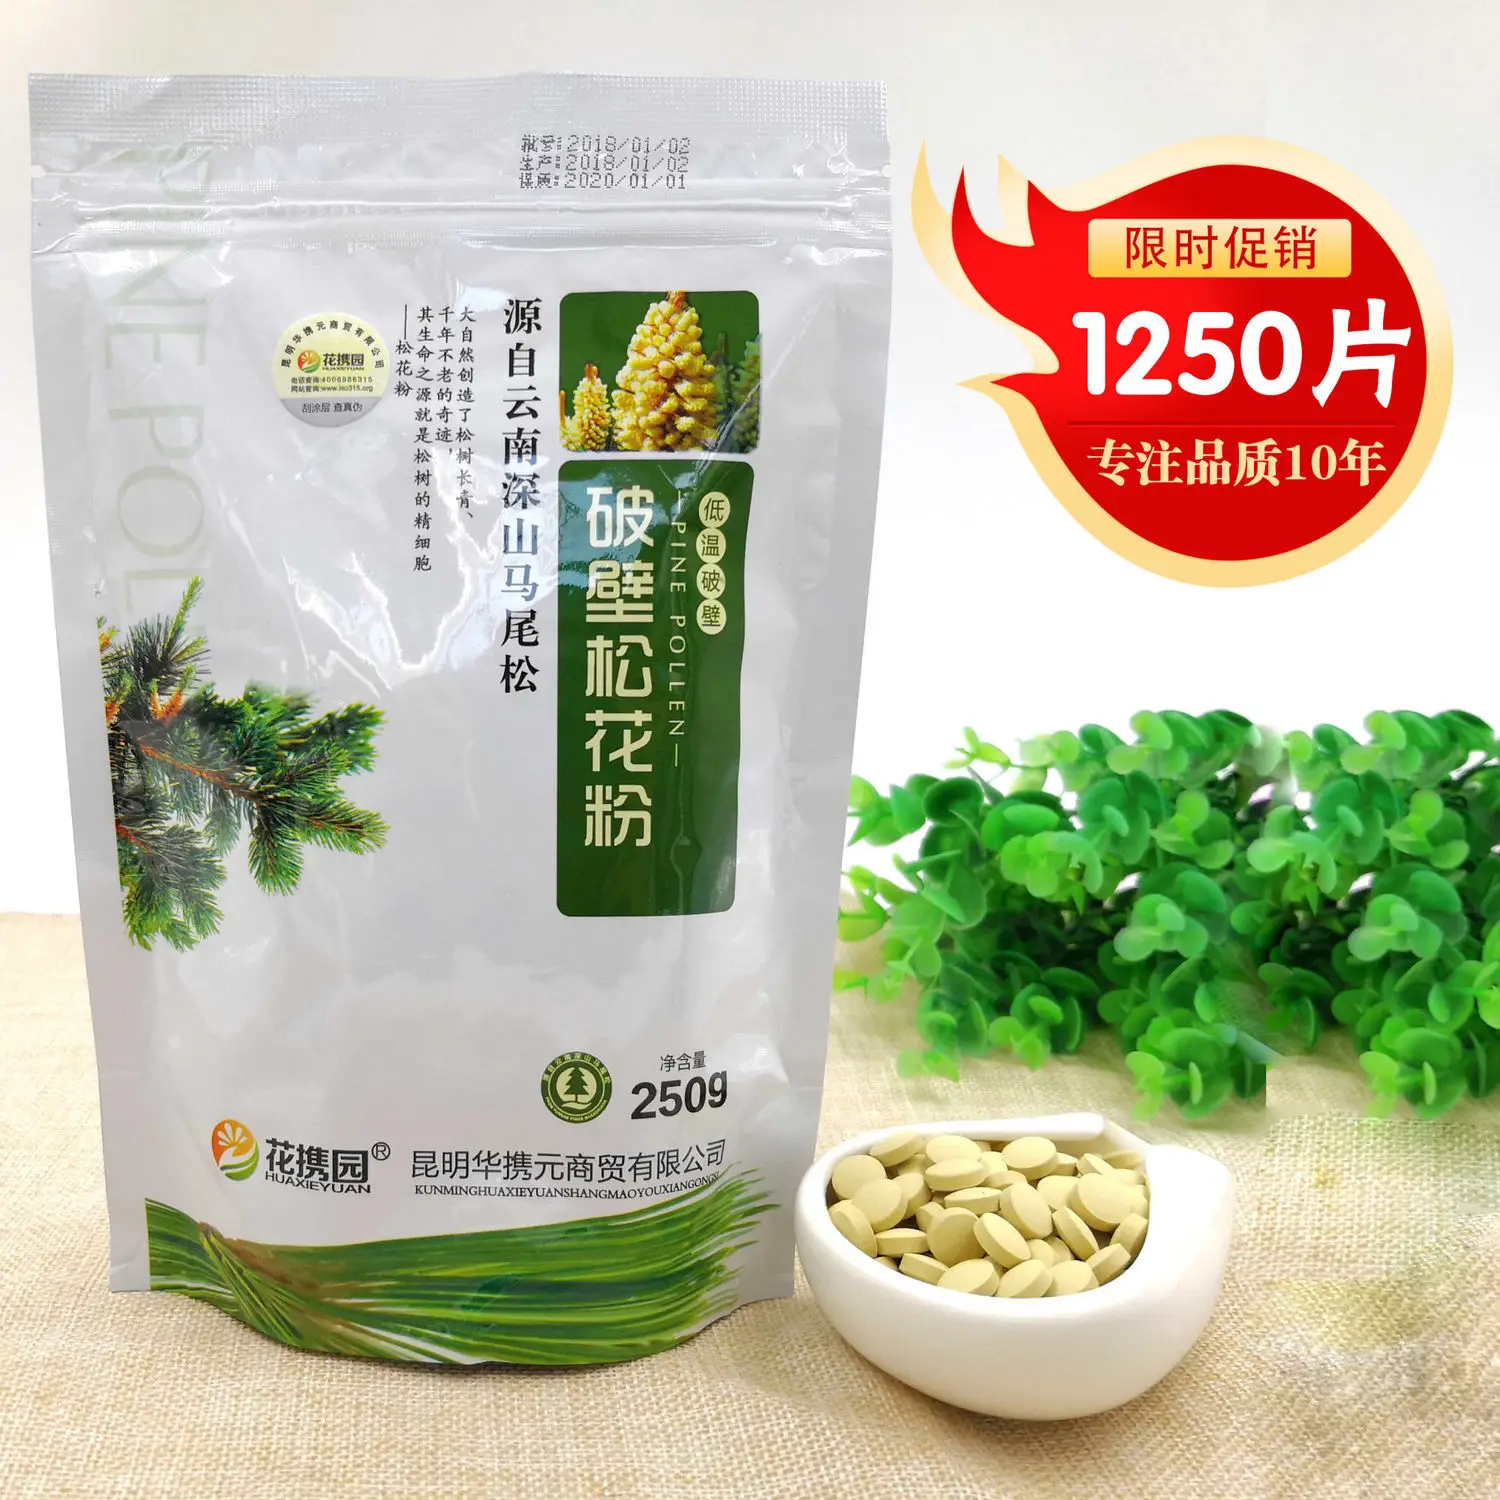 

Pure Wild Cracked Cell Wall Pine Pollen Tablet 0.5g*1250 Pills Organic Health Supple No Additive Improves Immunity Anti-fatigue